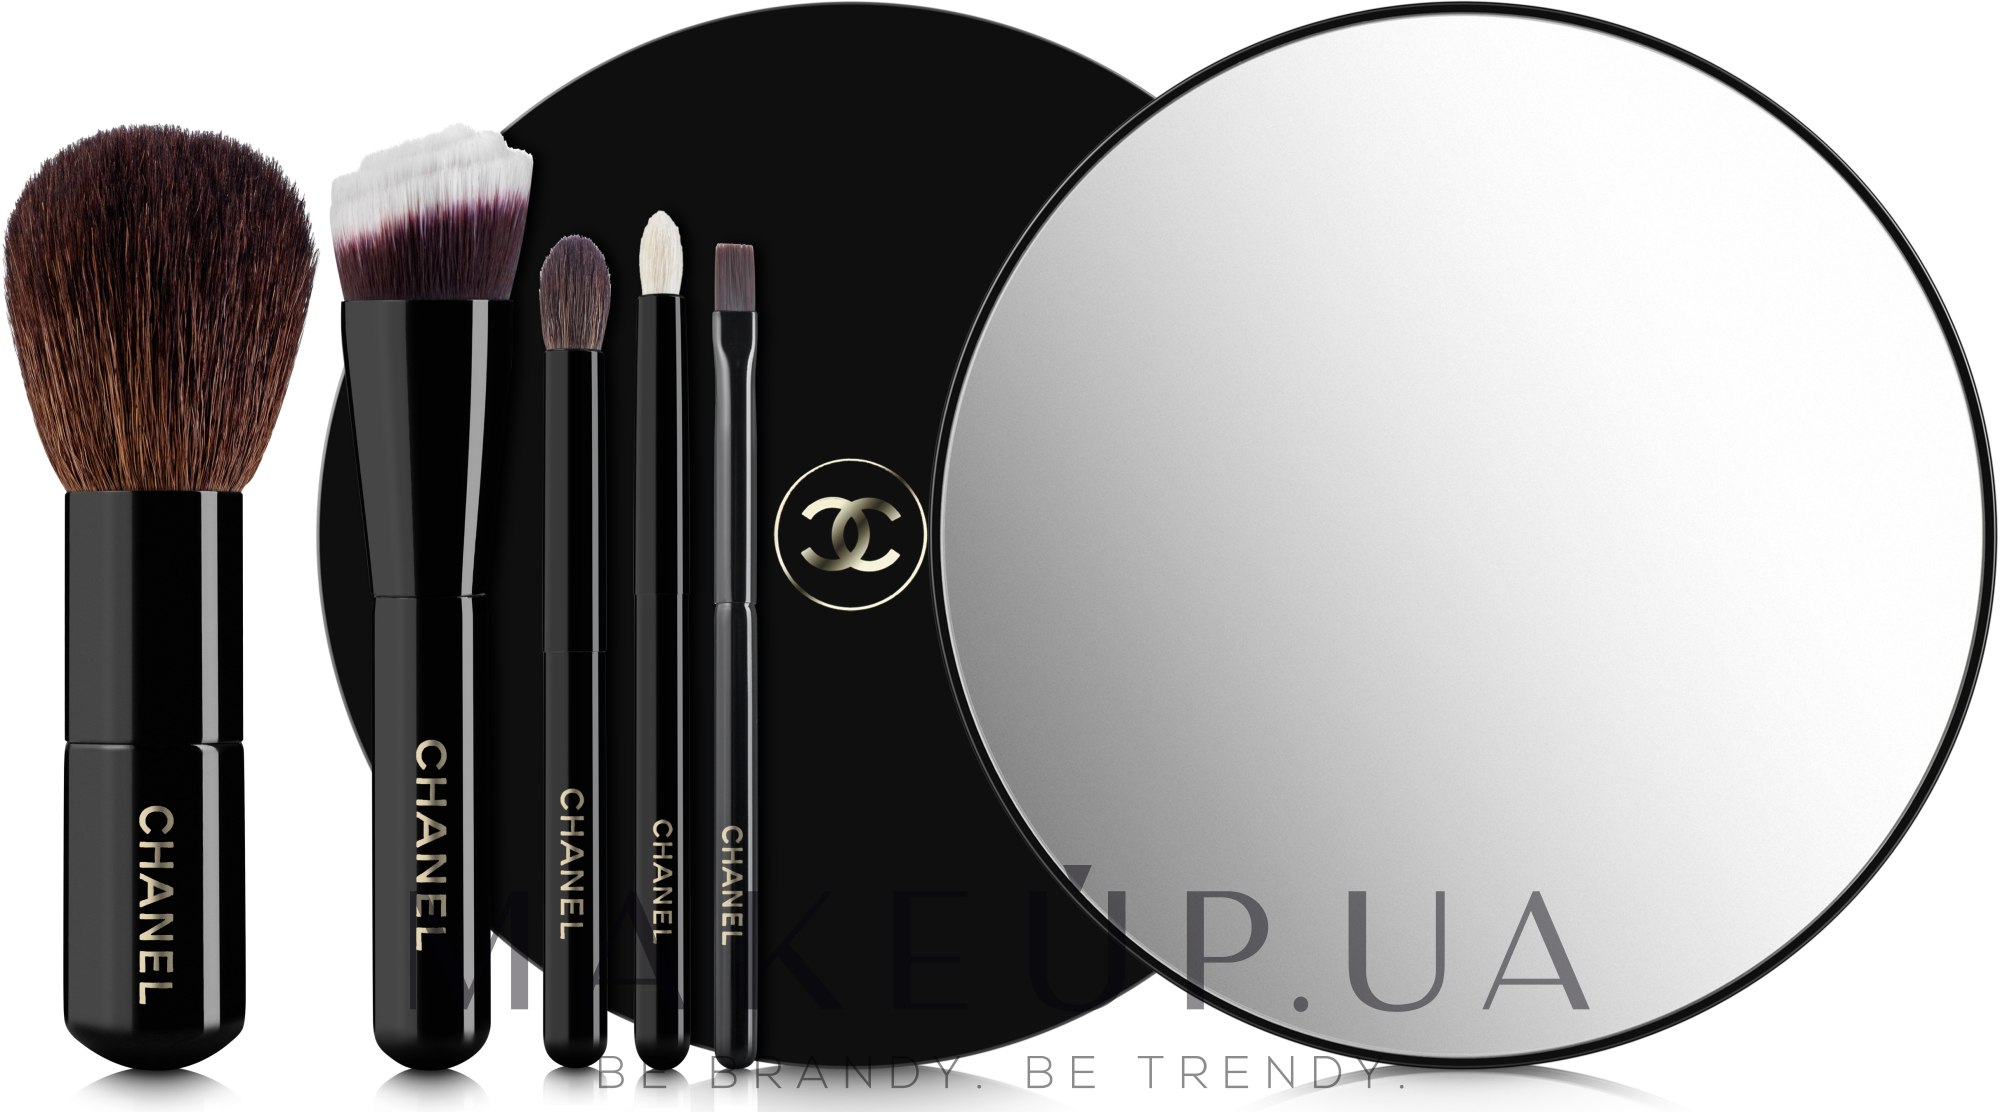 CHANEL Beauty Essentials Kits – Sunkissed Kit